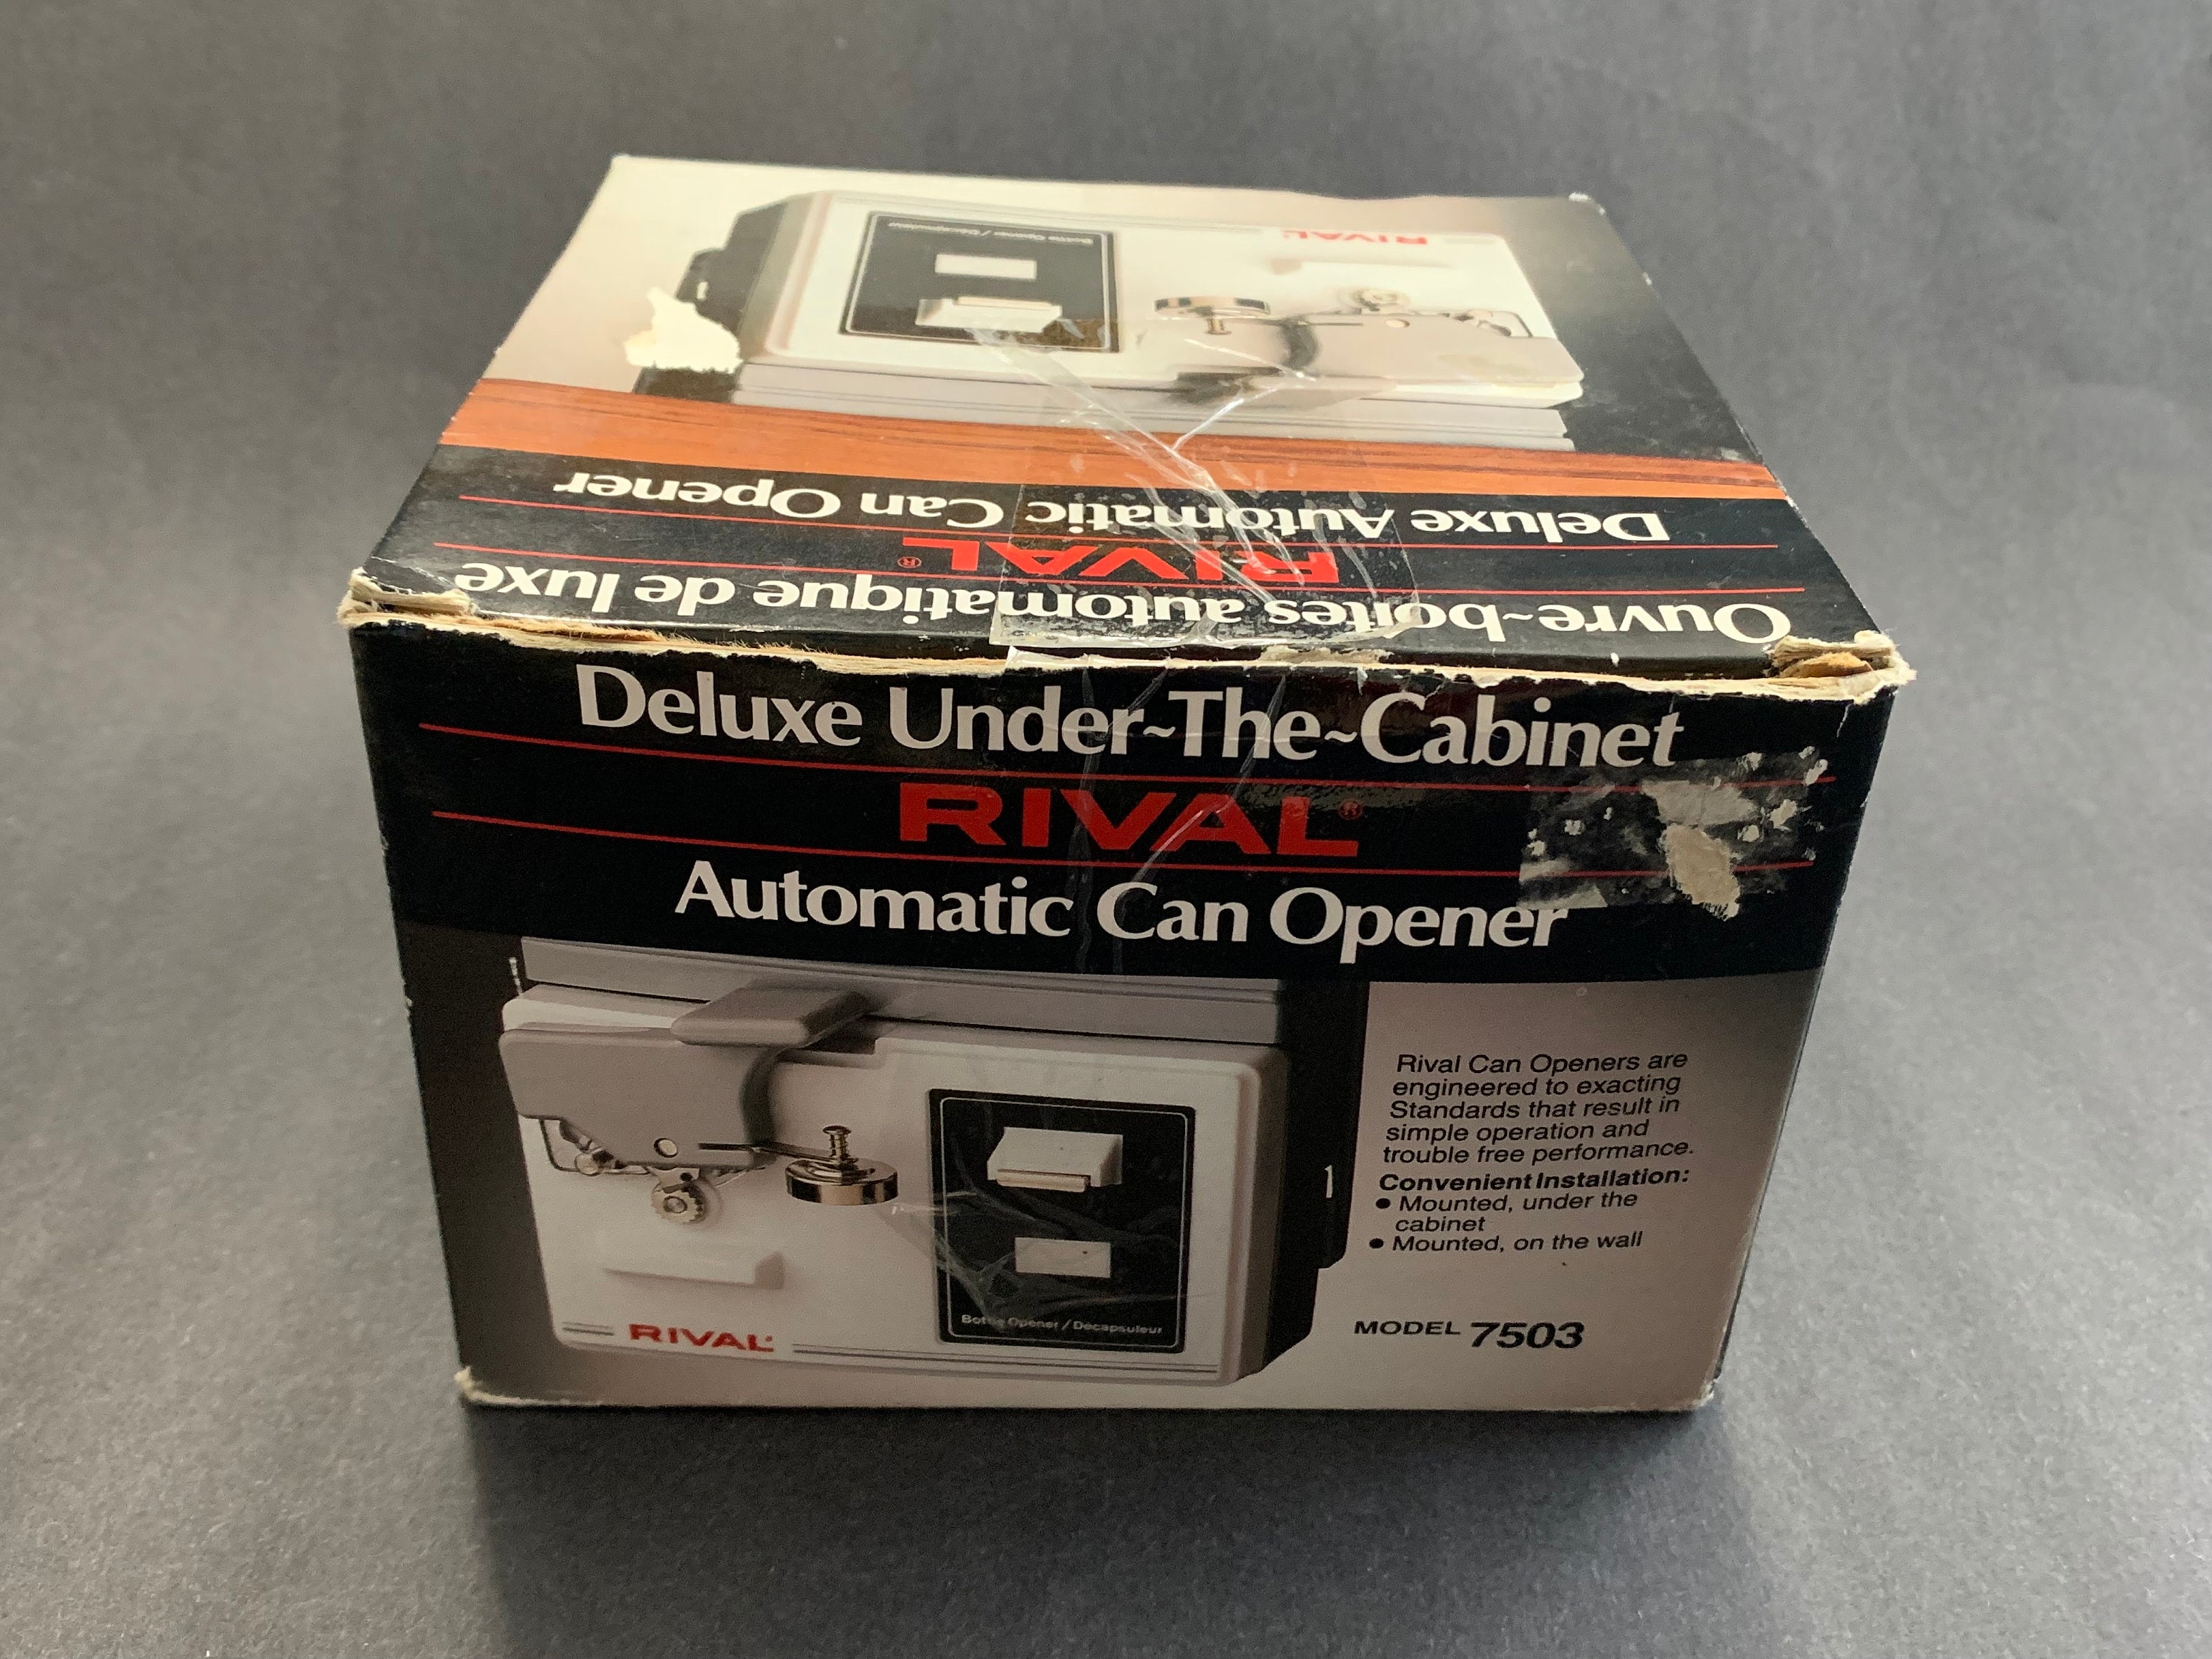 RIVAL Deluxe Under the Cabinet Automatic Can Opener Model 7503